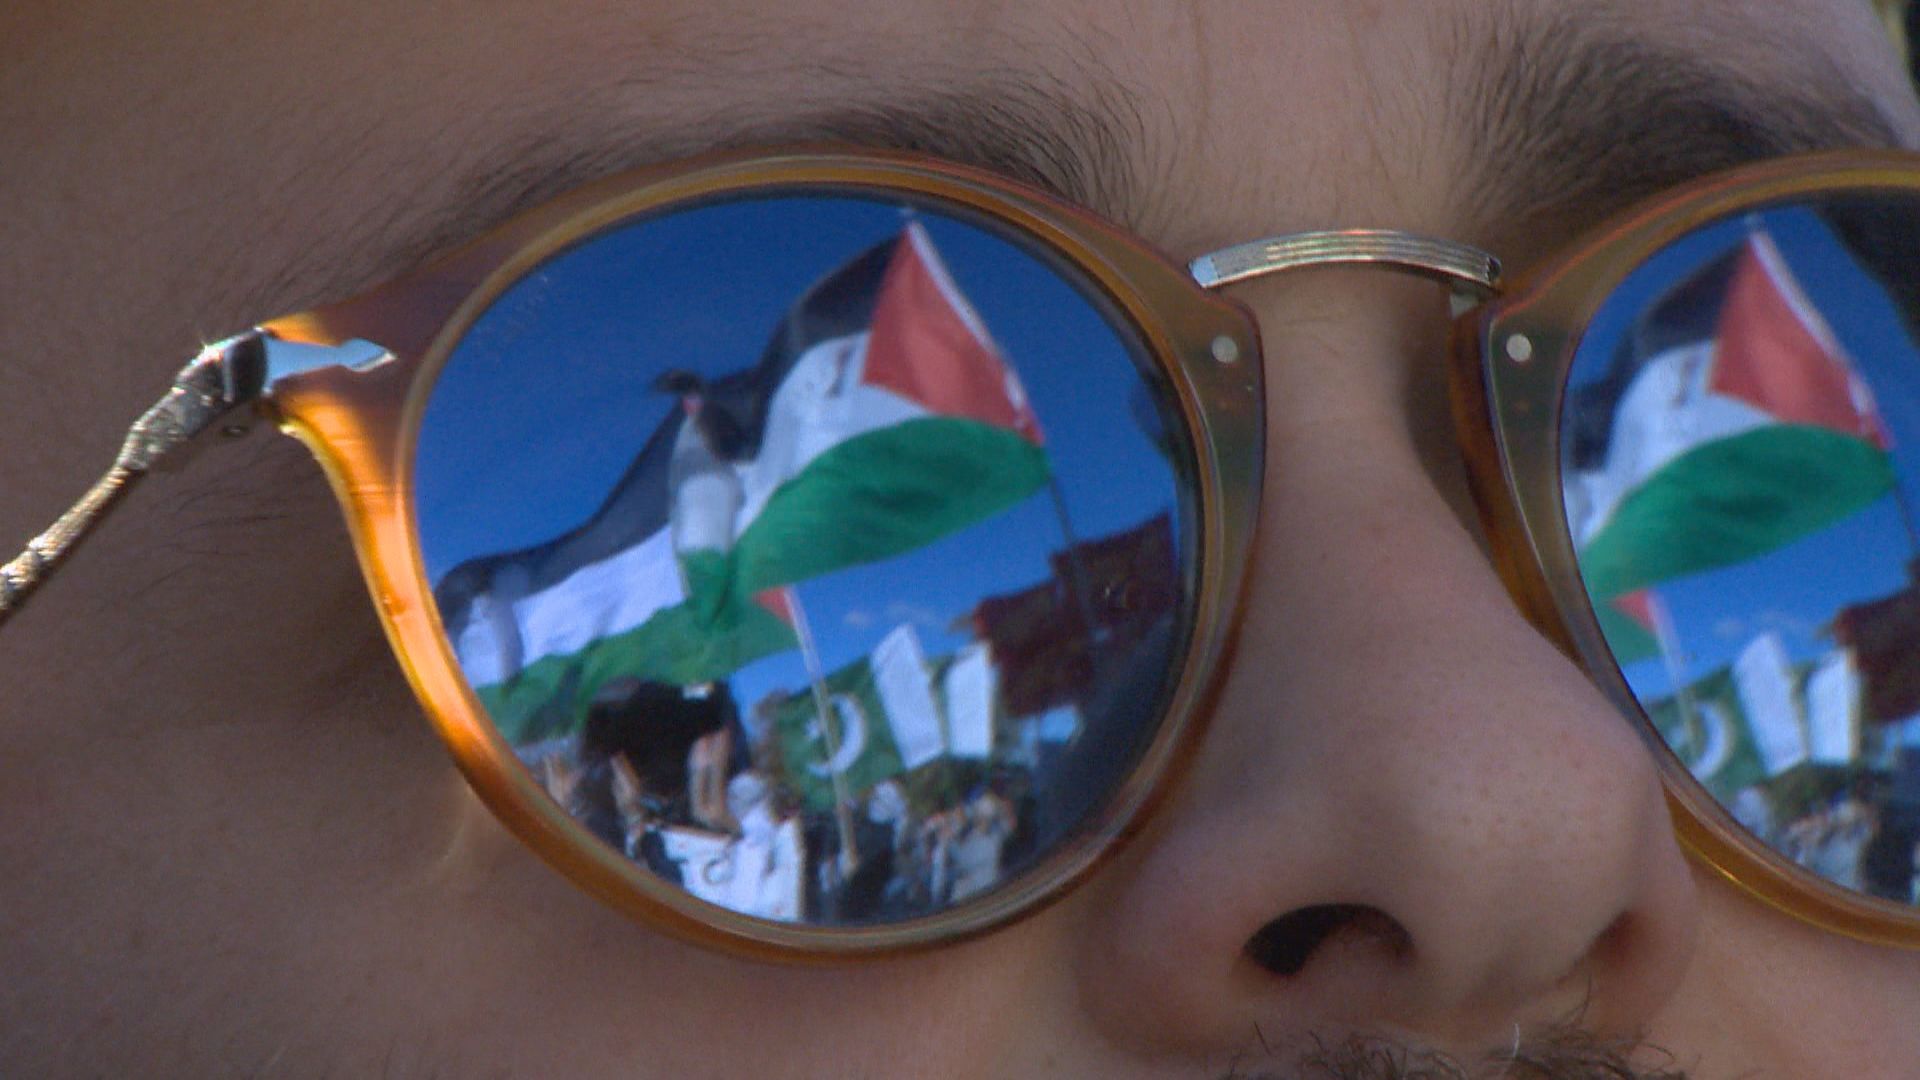 ‘Emotions are very raw:’ Trying to ease Montreal tensions amid Israel-Hamas conflict